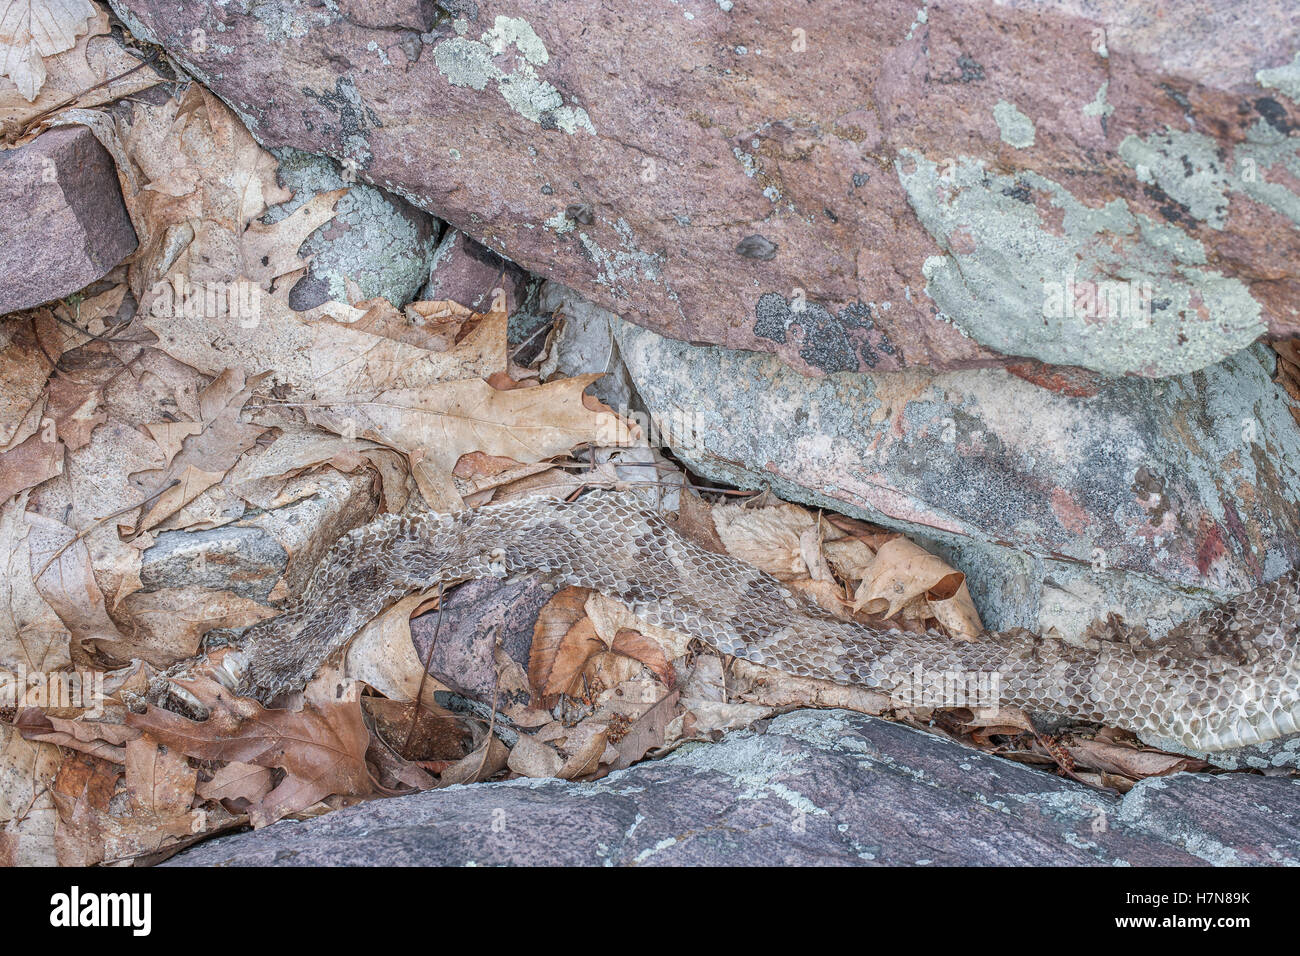 Timber Rattlesnakes shed with a few weeks of emerging from the den.  This shed was found in a rock field near a den. Stock Photo